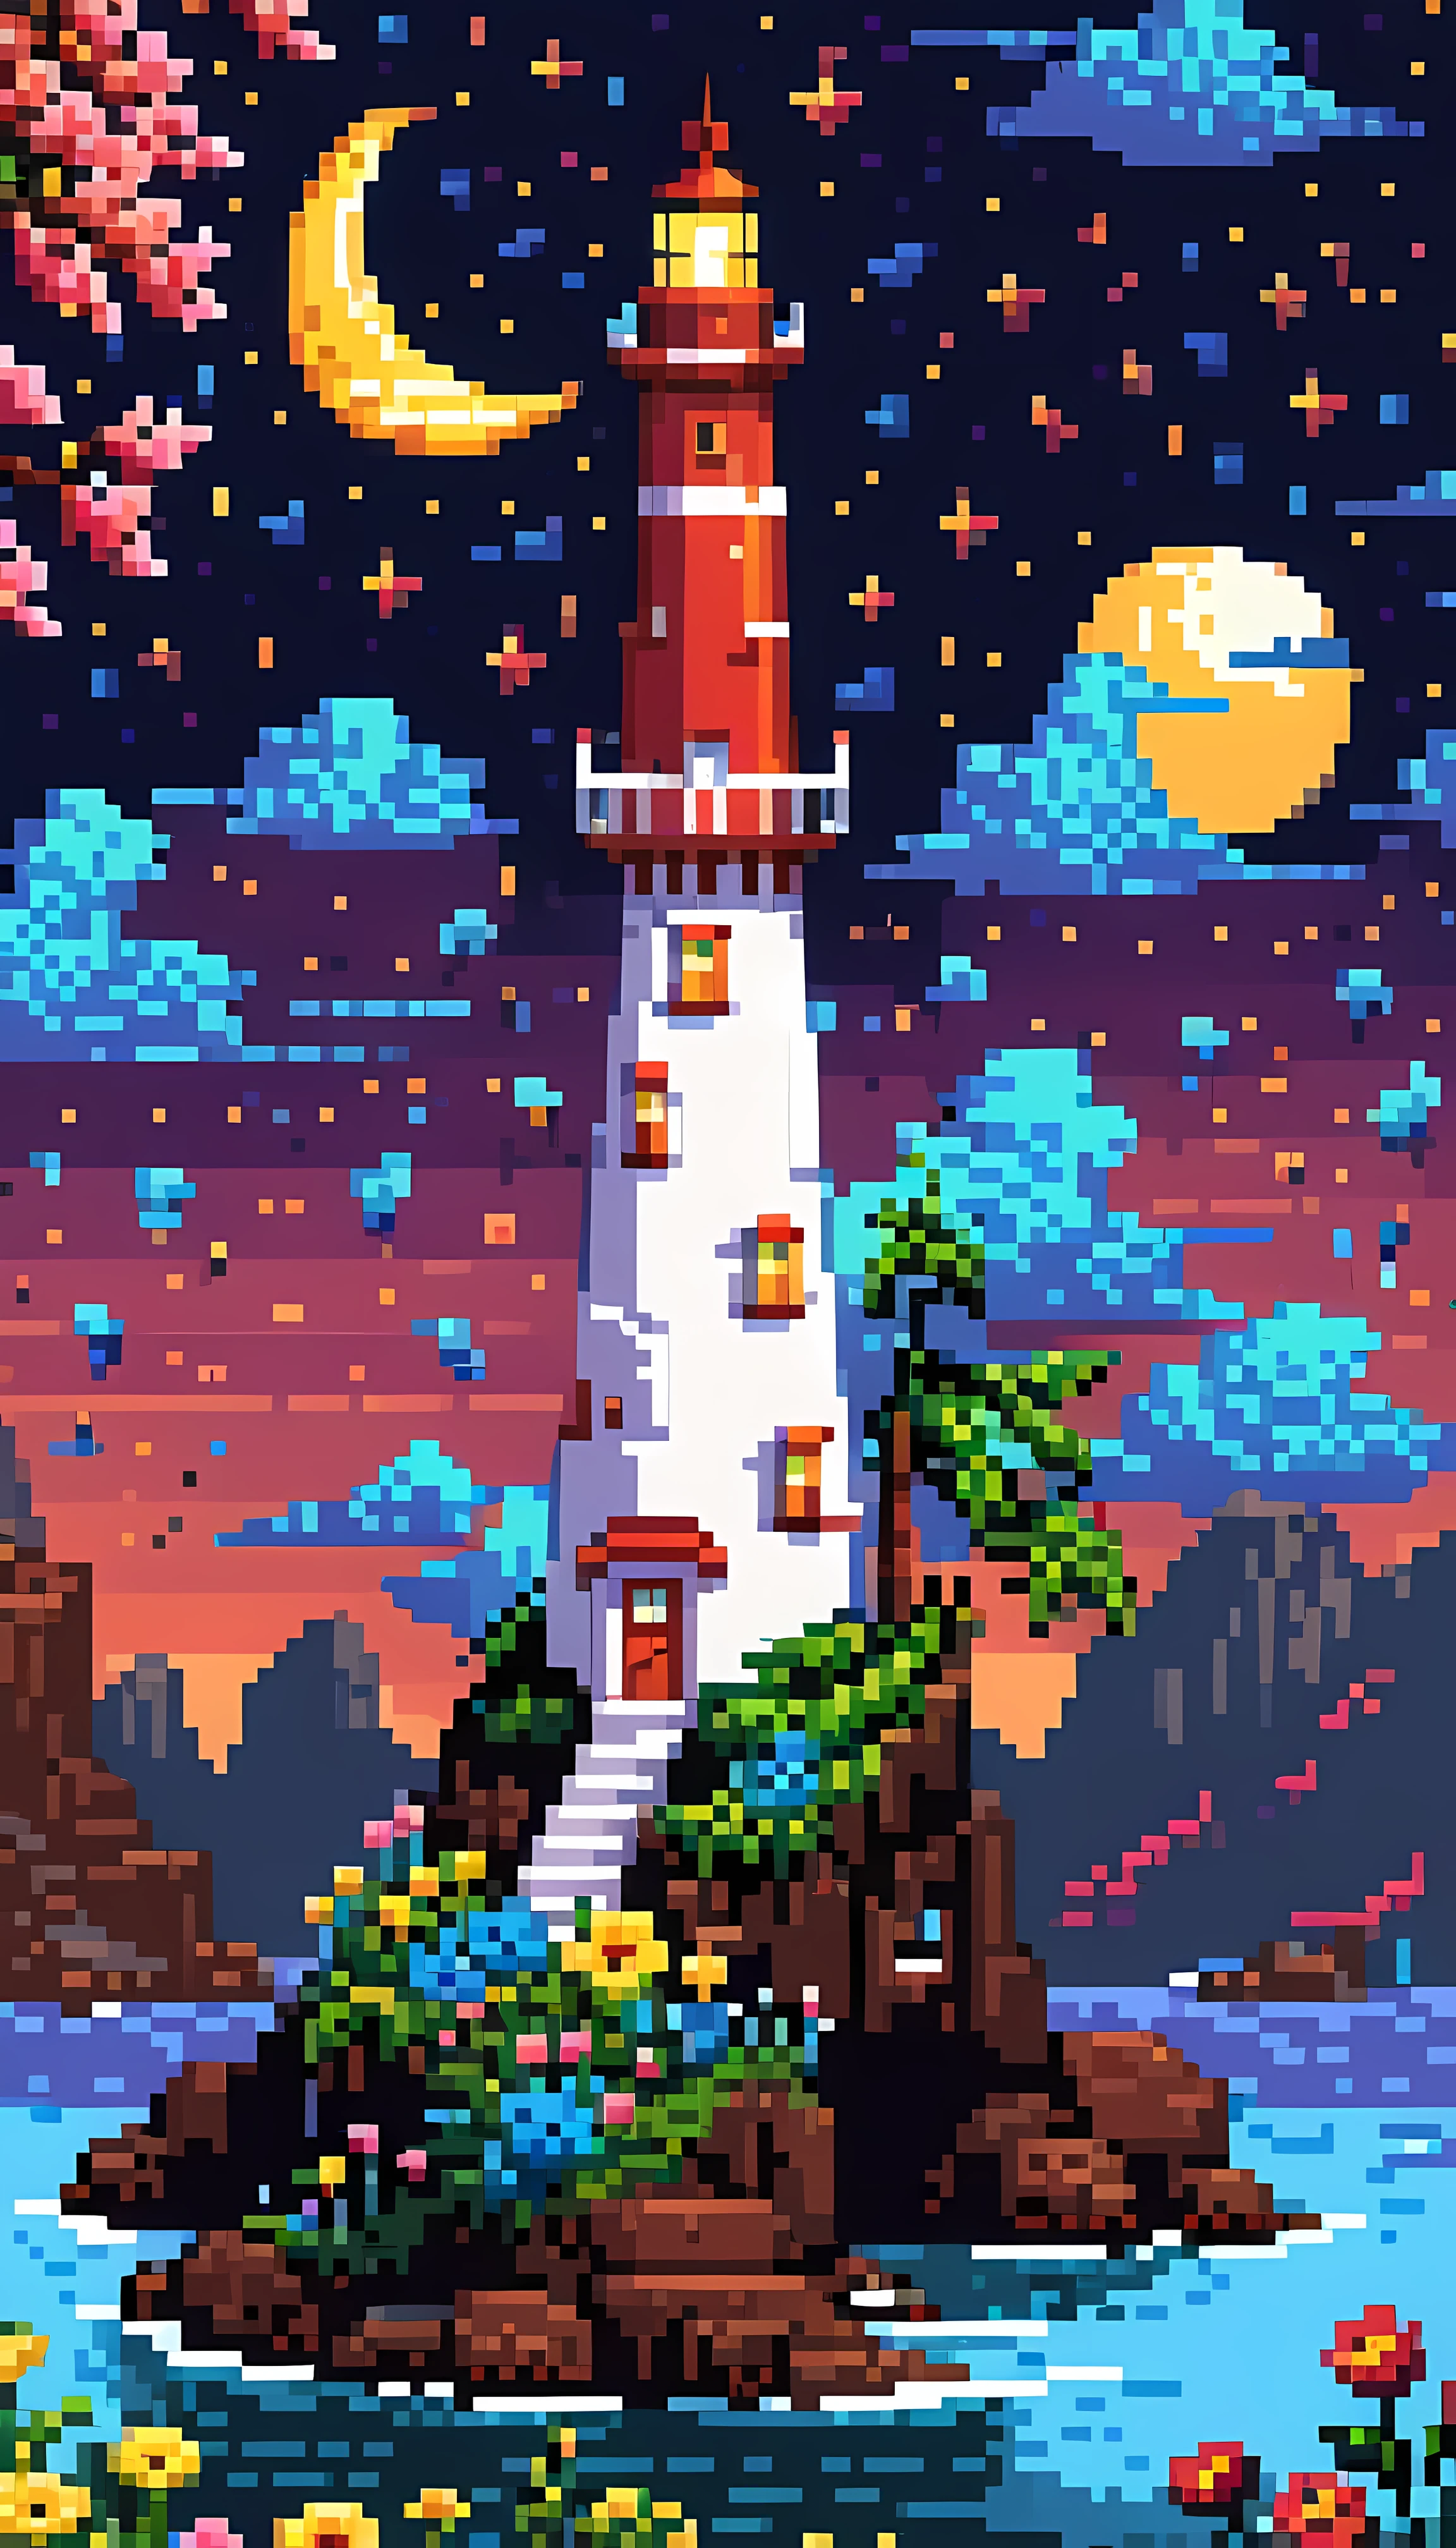 CuteCartoonAF, Cute Cartoon, masterpiece in maximum 16K resolution, superb quality, a whimsical tall lighthouse on a floating big island, the lighthouse has playful design, the floating island has colorful flowers and whimsical trees, night sky with winkling stars, a shooting star, a crescent moon, dreamy color palette. | ((More_Detail))